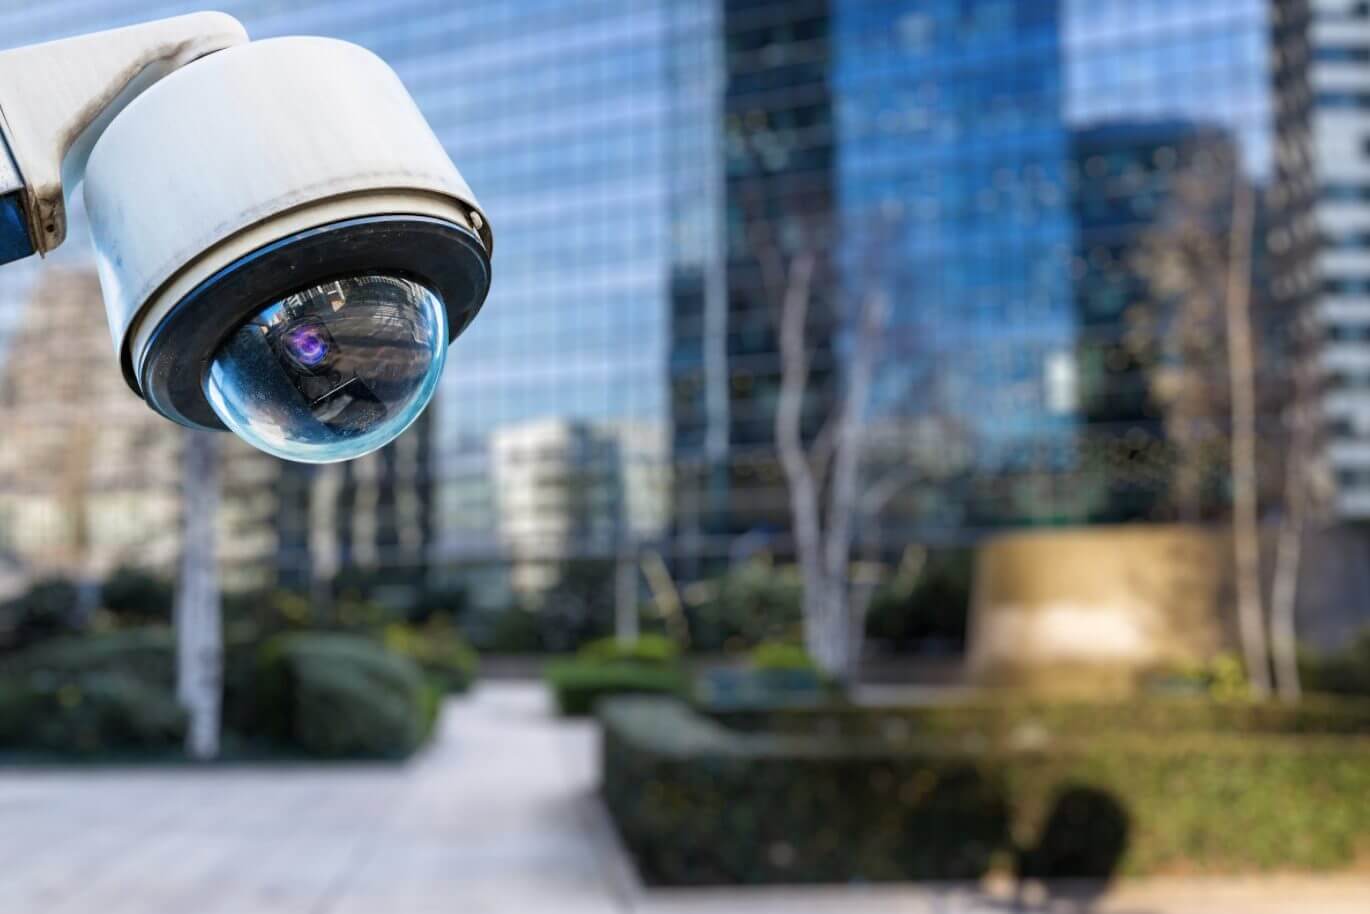 A round CCTV camera is in focus, while the blurred background shows a city location.